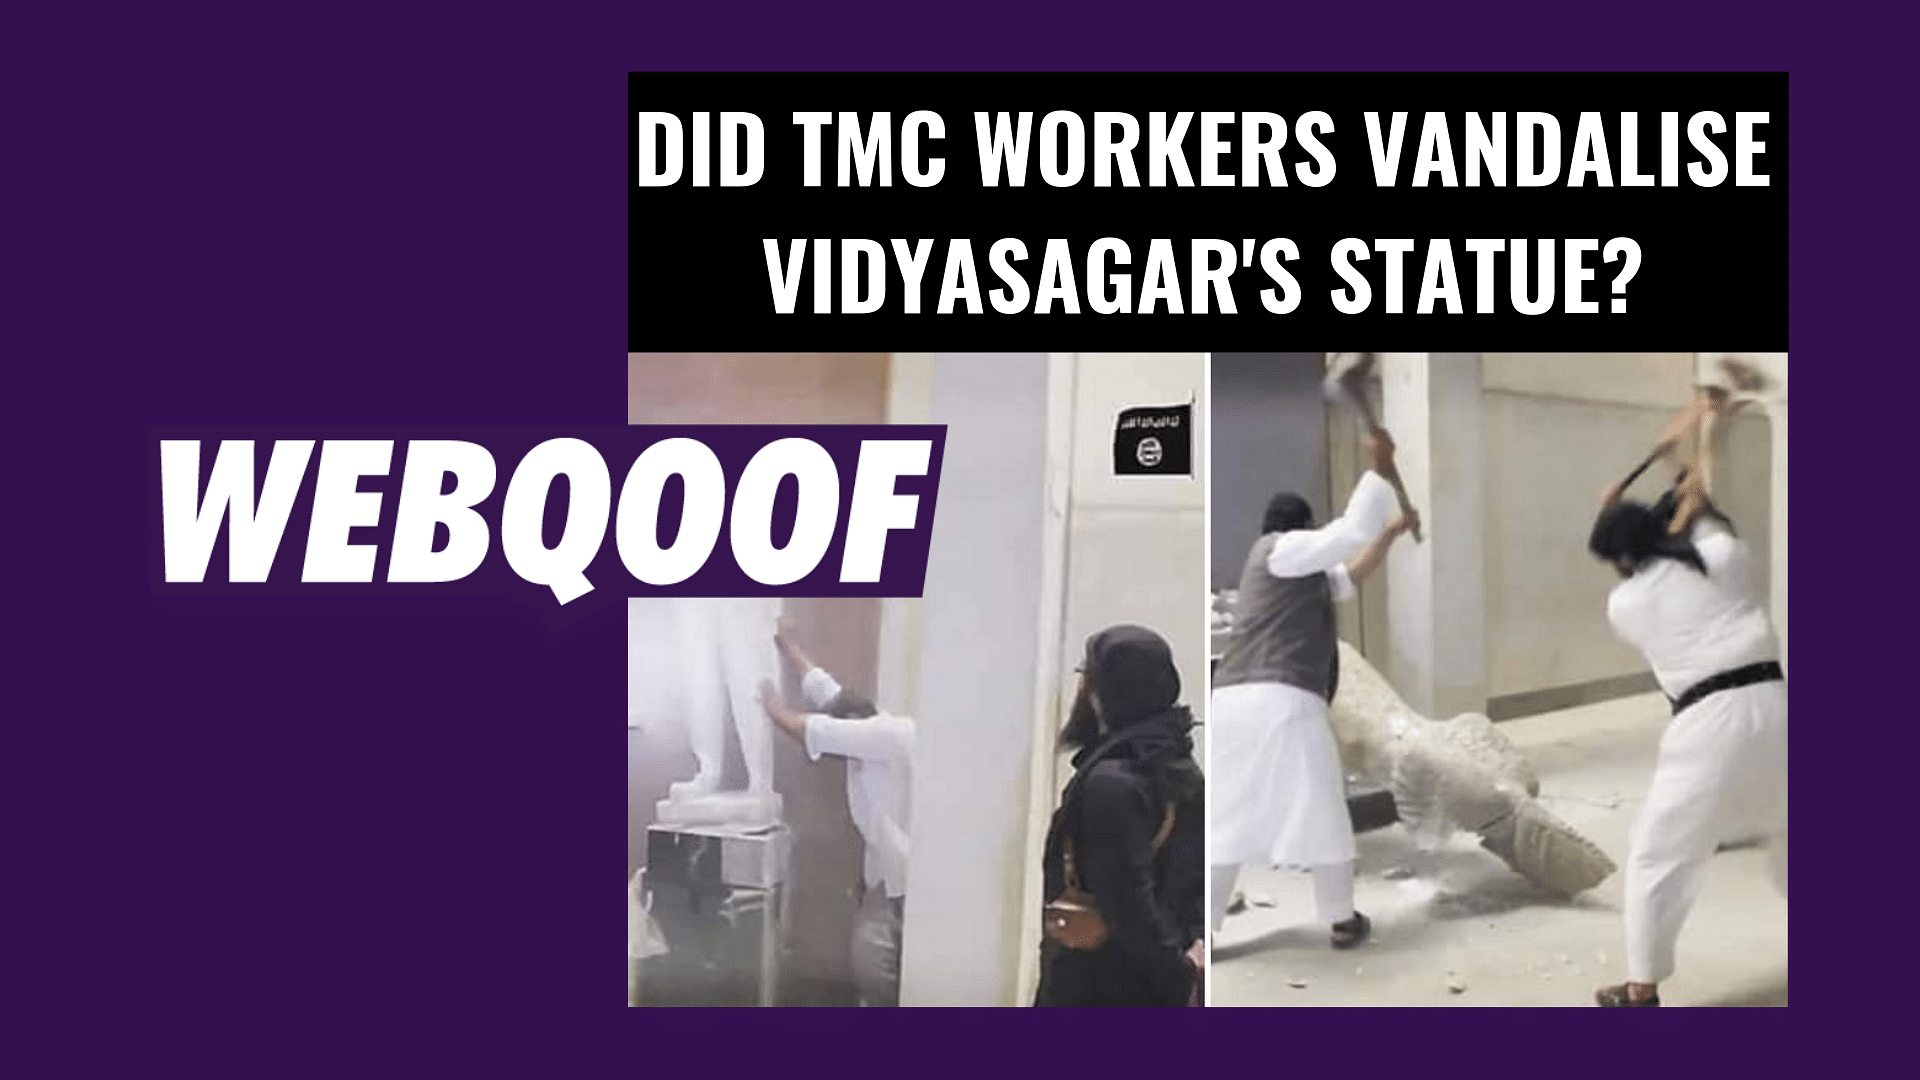 Viral images falsely claimed ISIS destroying artefacts in Iraq as TMC vandalising Vidyasagar’s statue.